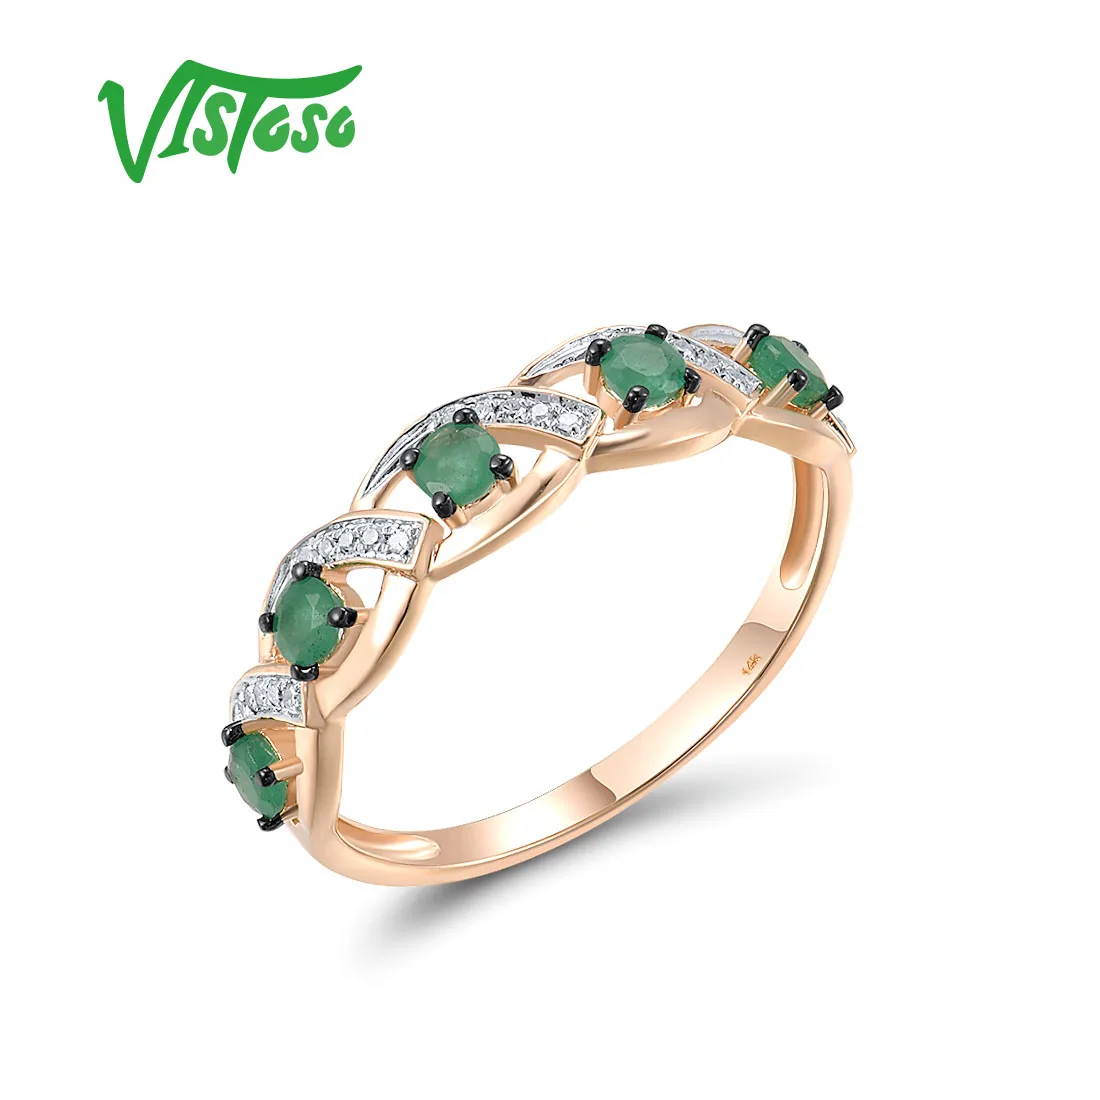 VISTOSO Authentic 14K 585 Rose Gold Ring For Women Sparkling Diamond And Emerald Engagement Wedding Party Fine Fashion Jewelry